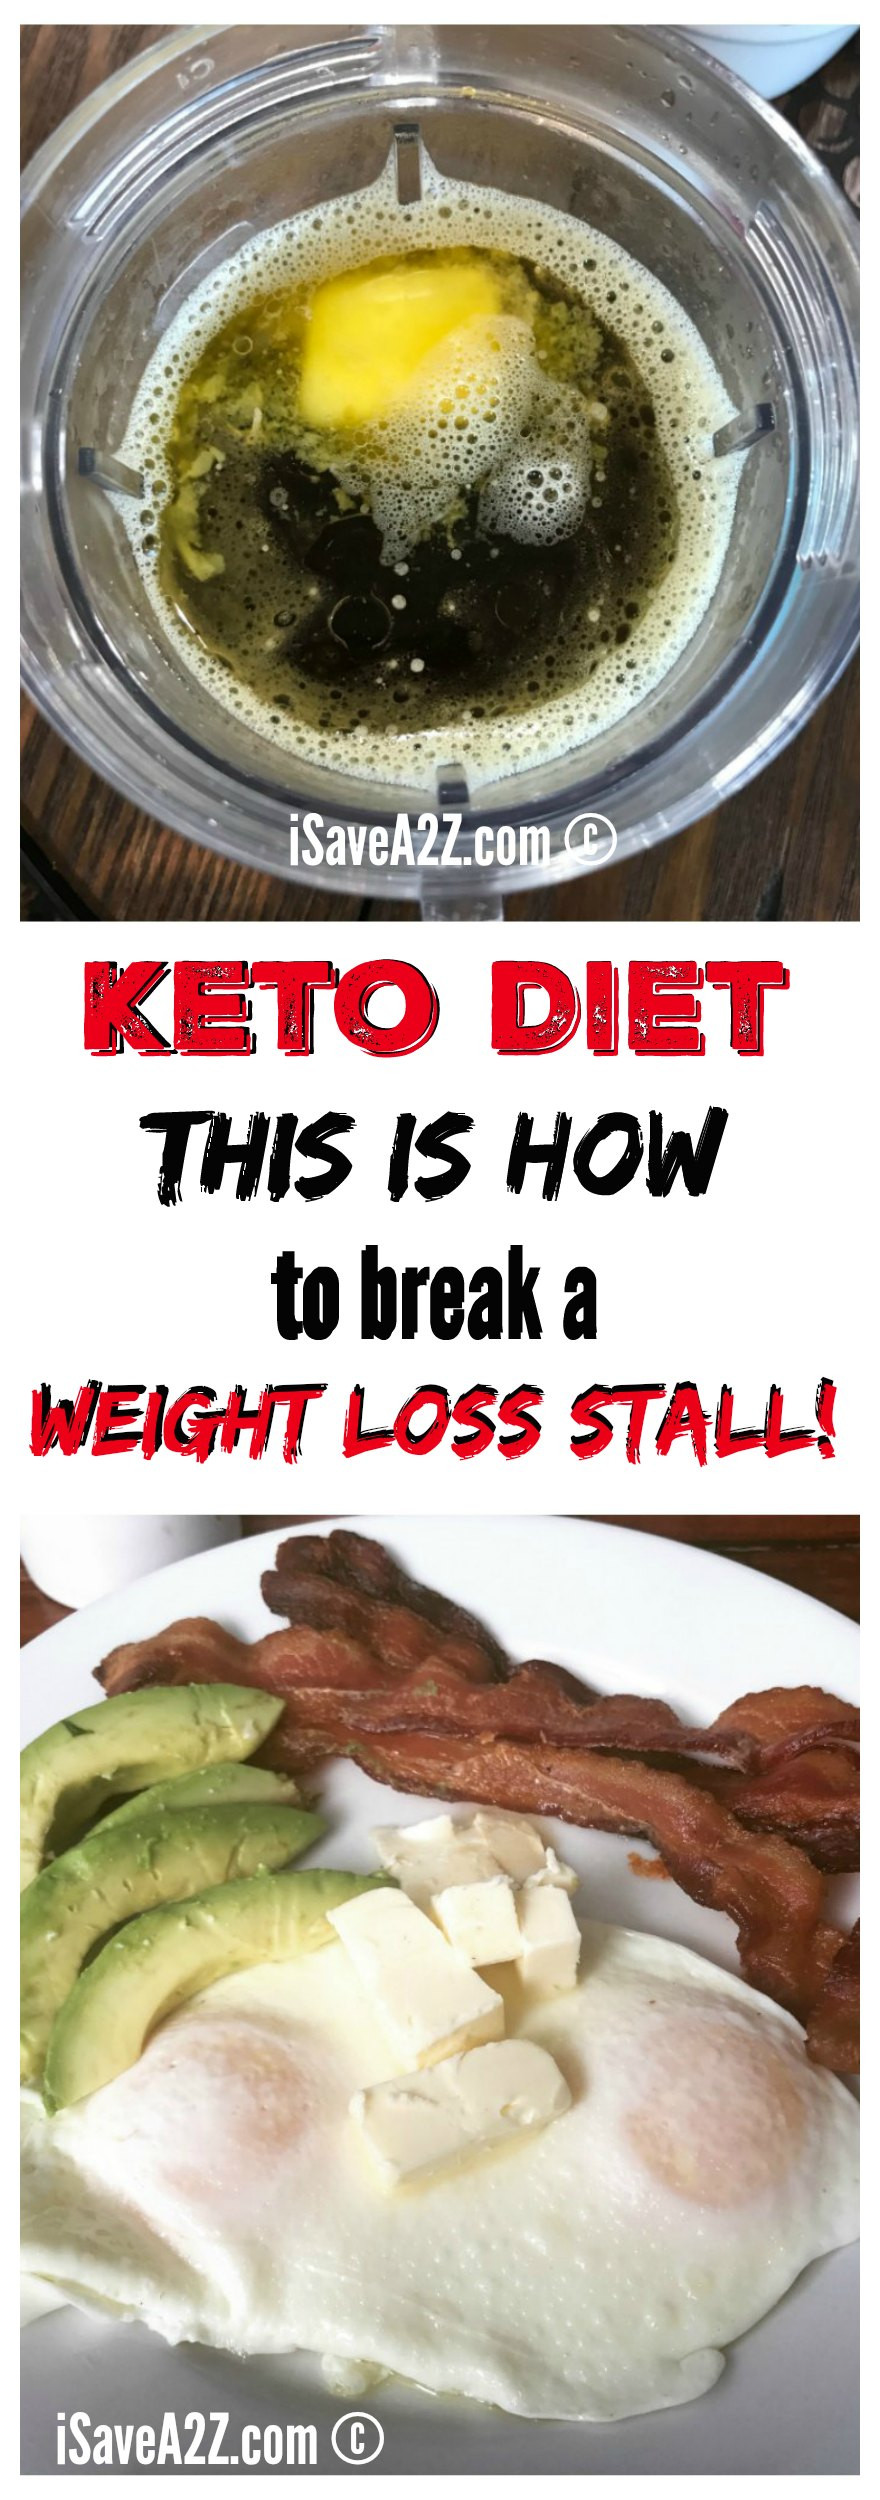 Keto Diet Bloating
 How to Break a Weight Loss Stall on the Ketogenic Diet